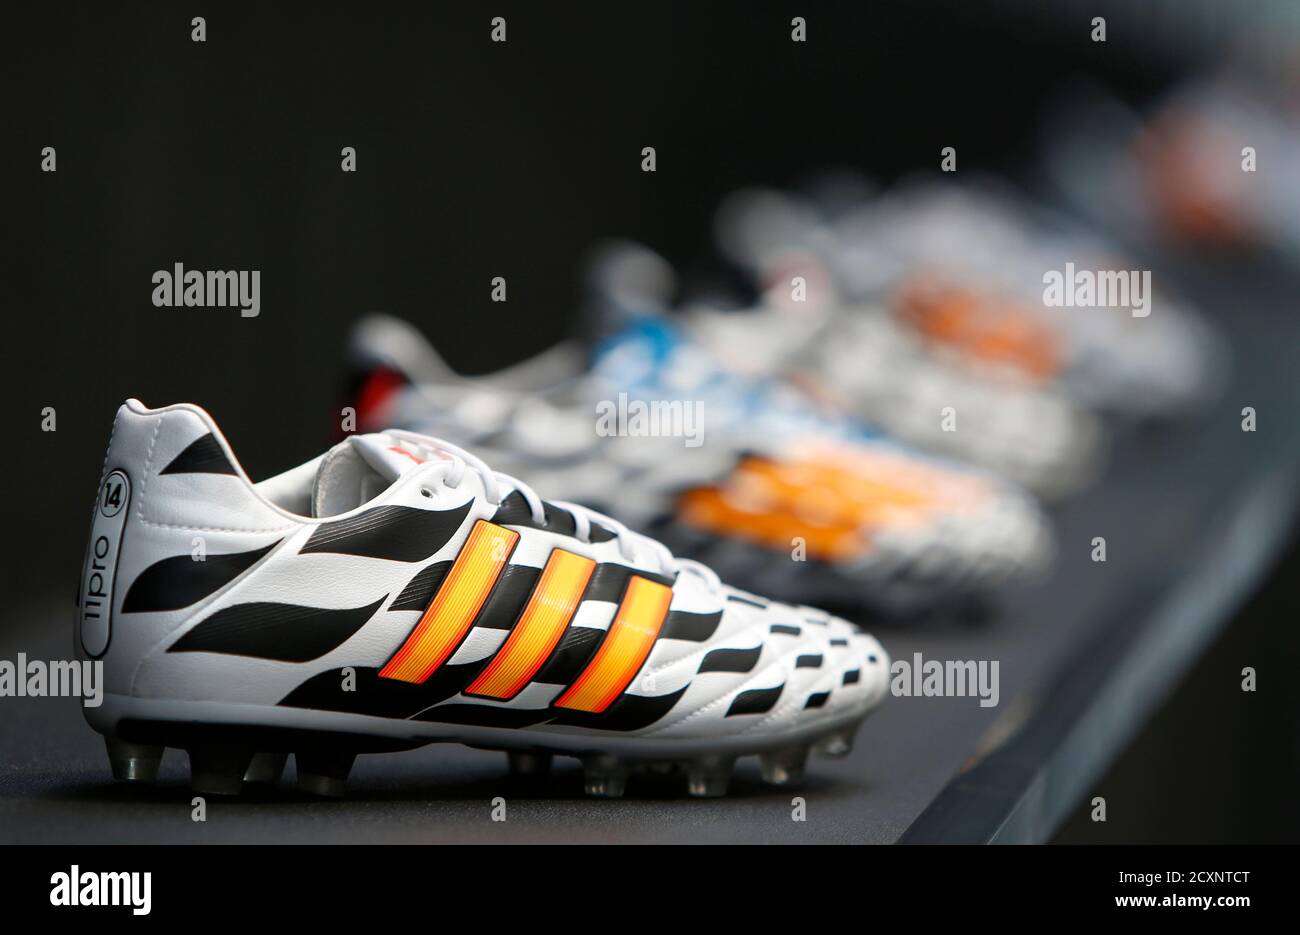 Adidas soccer shoes are pictured before 